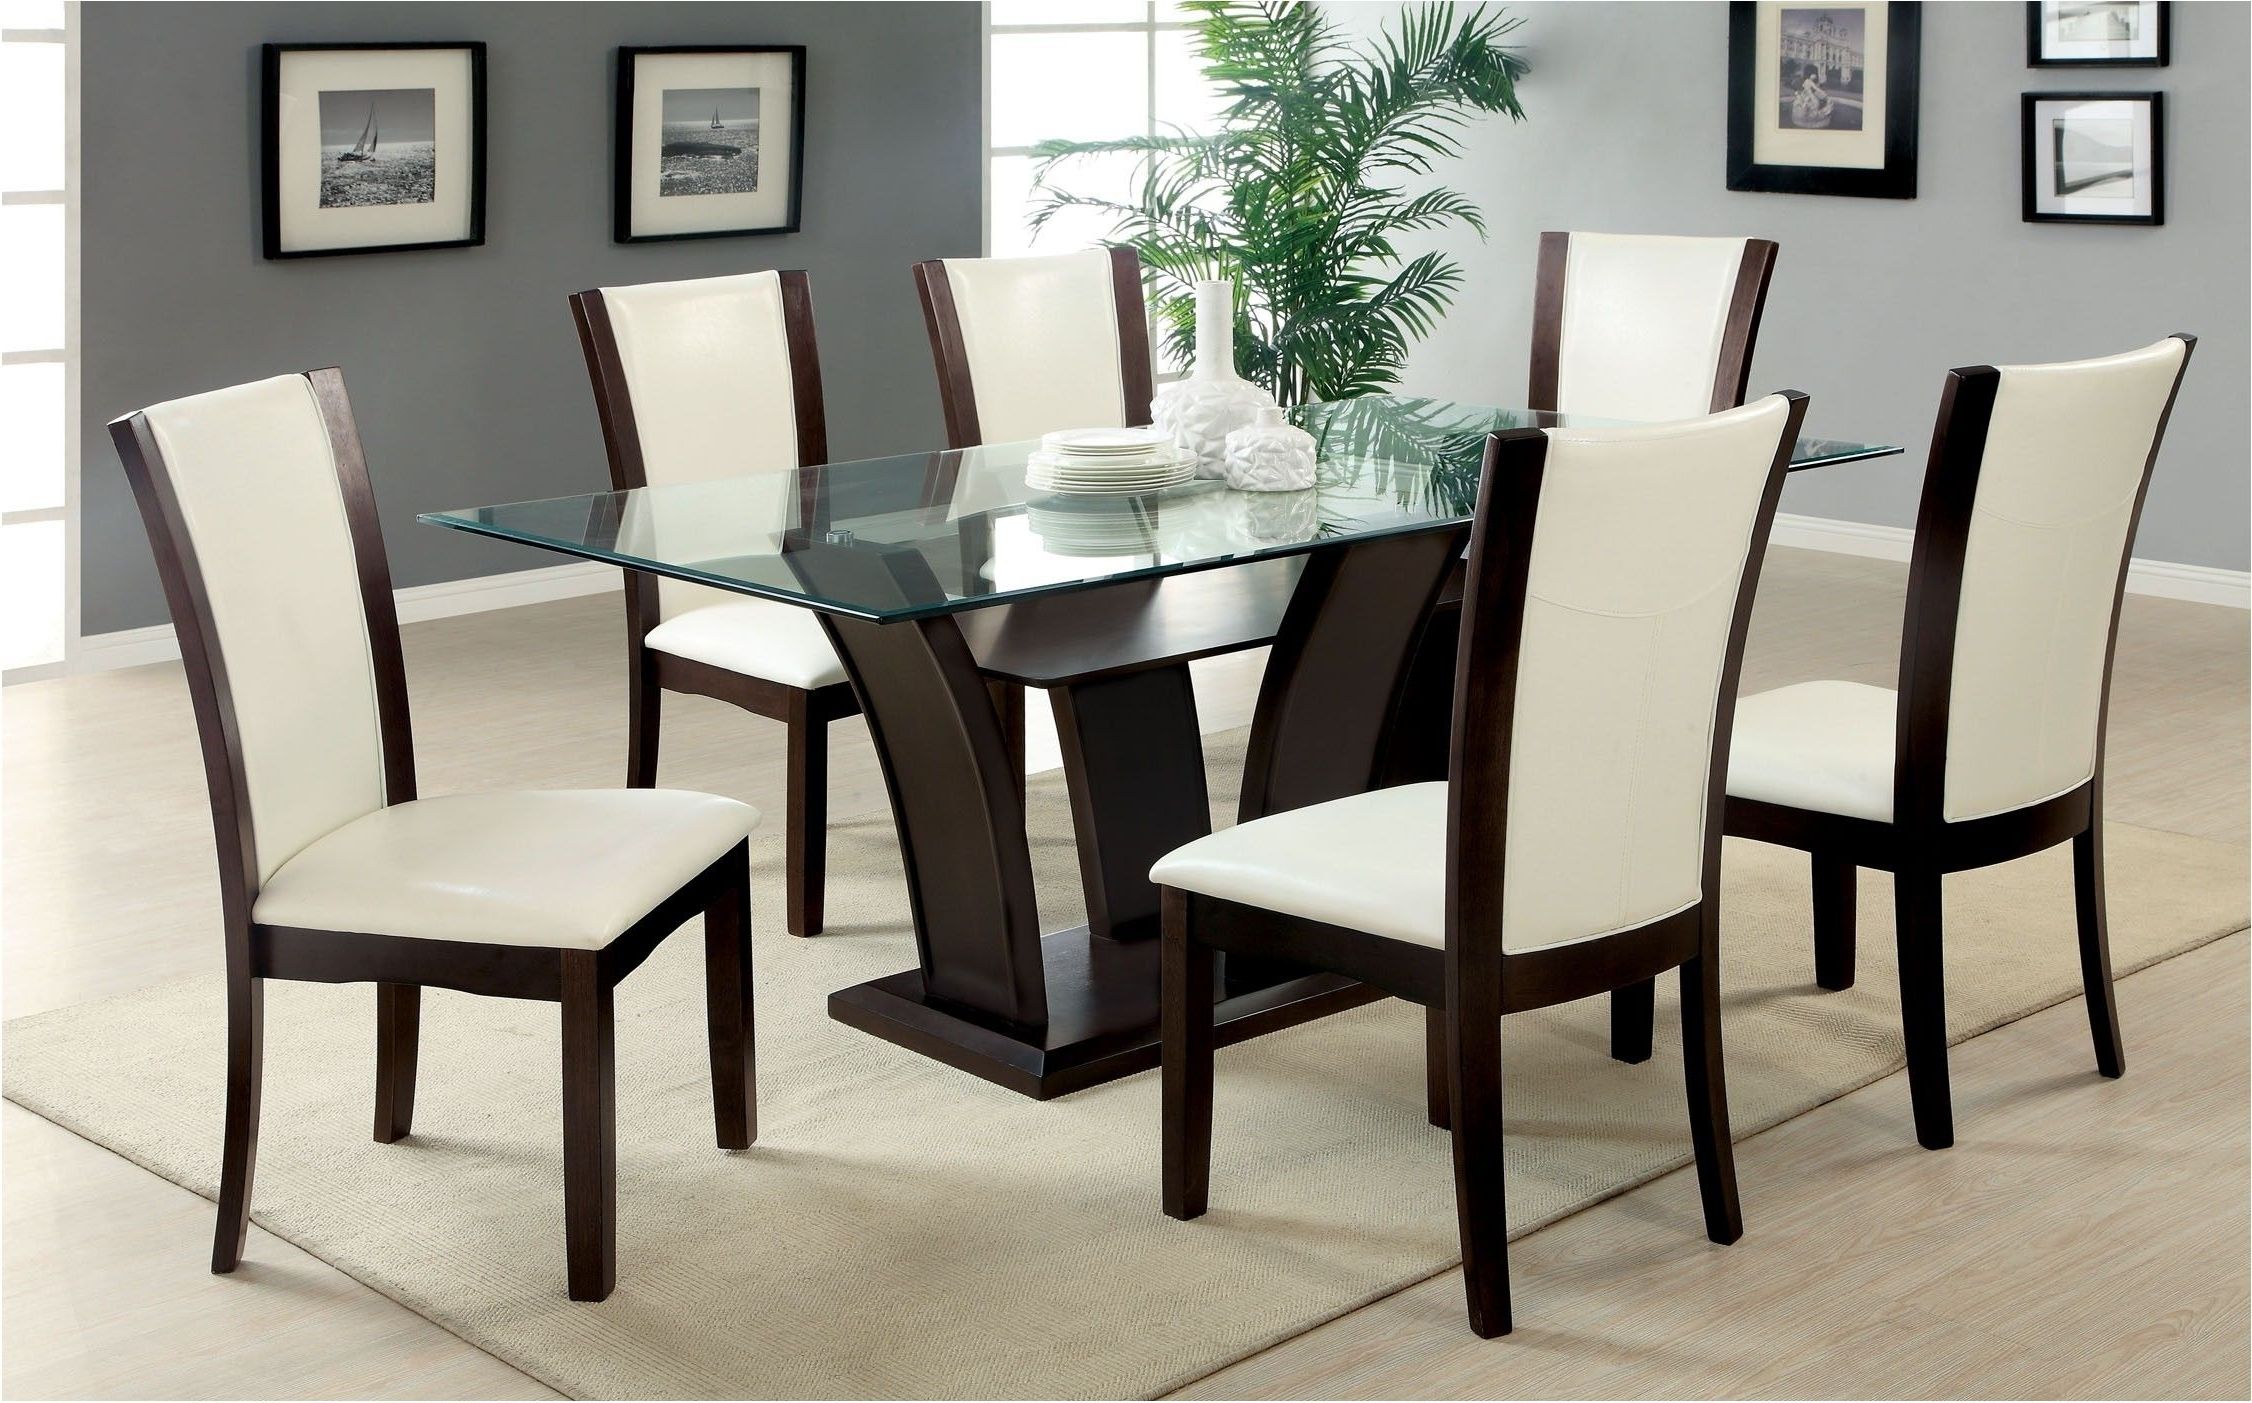 Terrific Dining Table Set 6 Seater Price Dining Room Ideas – Dining Throughout Best And Newest 6 Seat Dining Tables And Chairs (View 1 of 25)